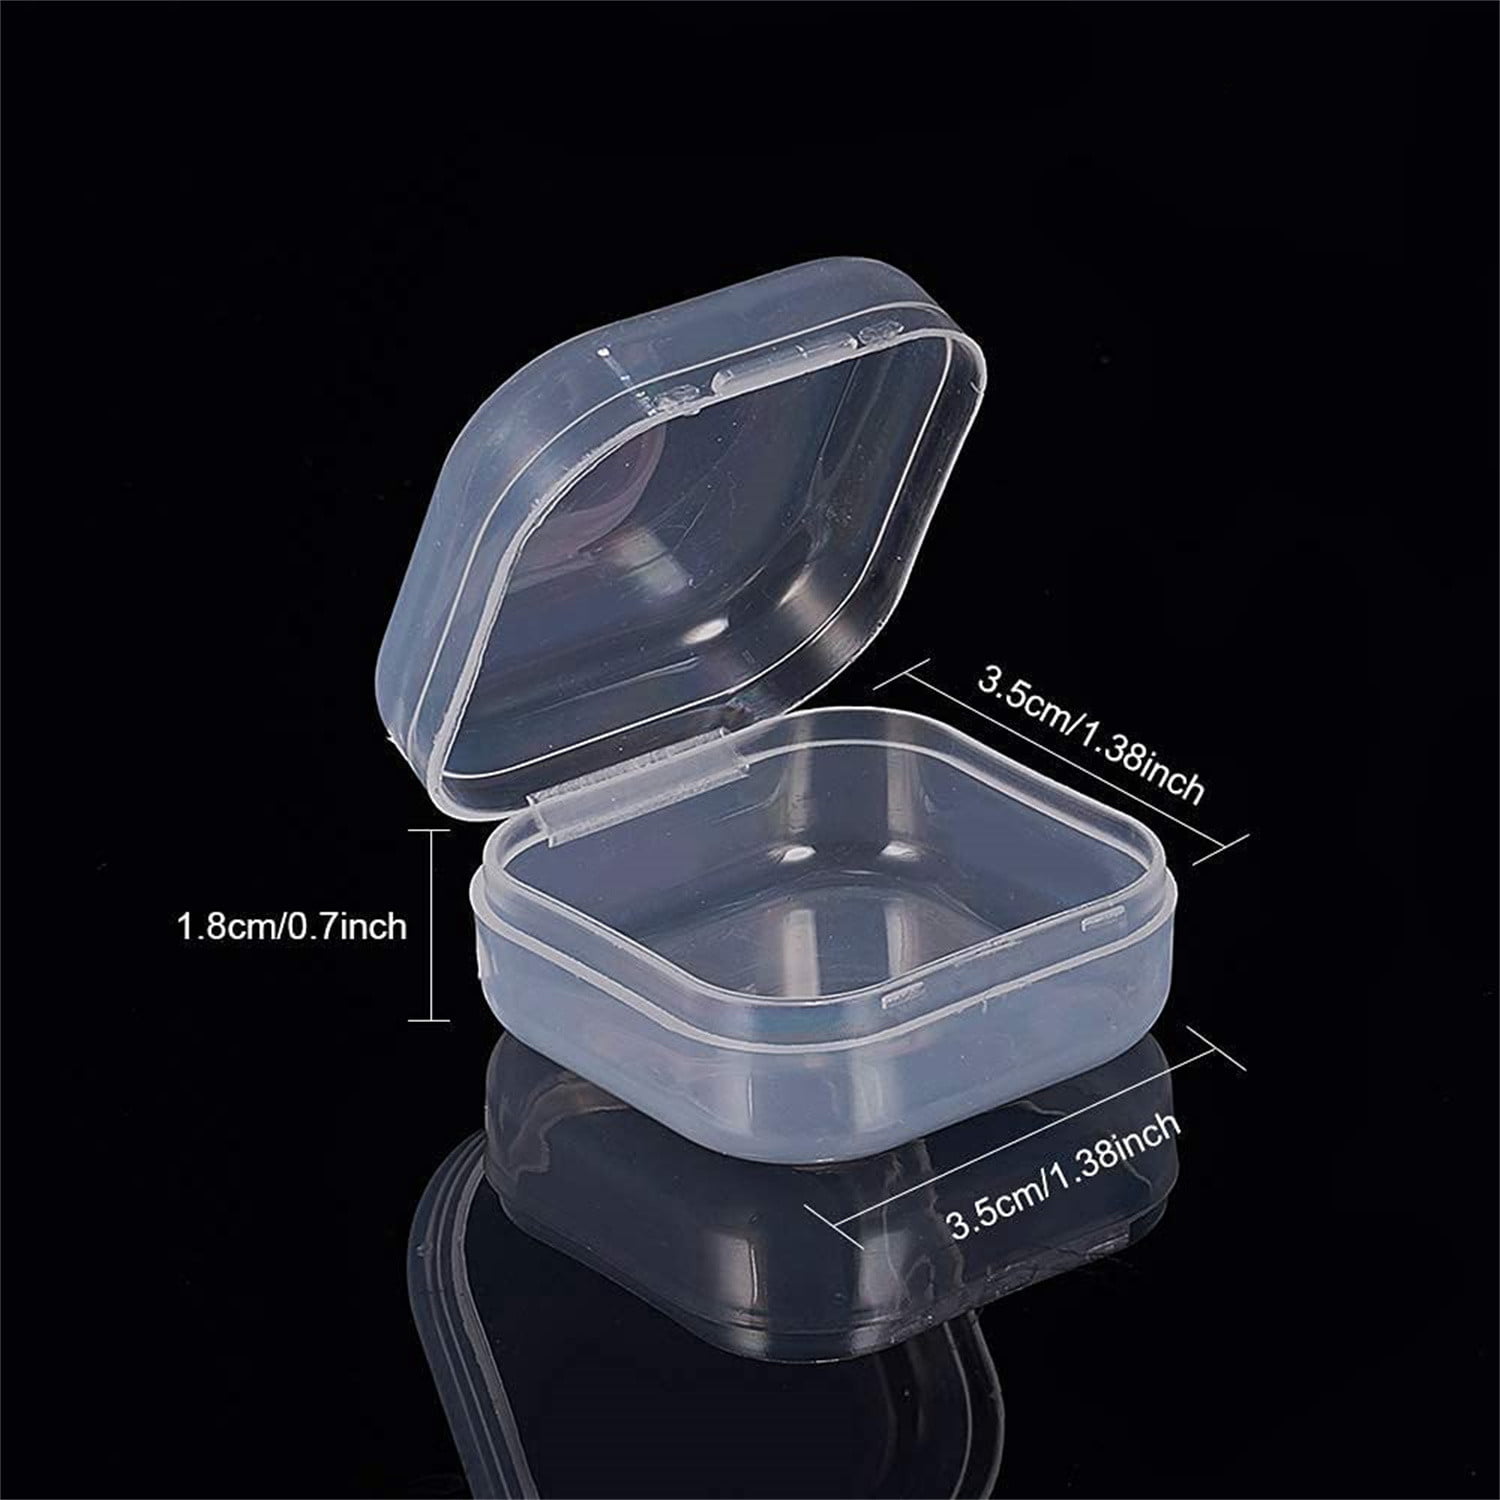 50 Pcs Clear Small Plastic Storage Containers Anti Oxidation Transparent  Jewelry Holder for Item Craft, Beads, Pills, Ear Studs, Necklaces,Rings,  Case (1.37 x 1.37 0.7 Inches) 